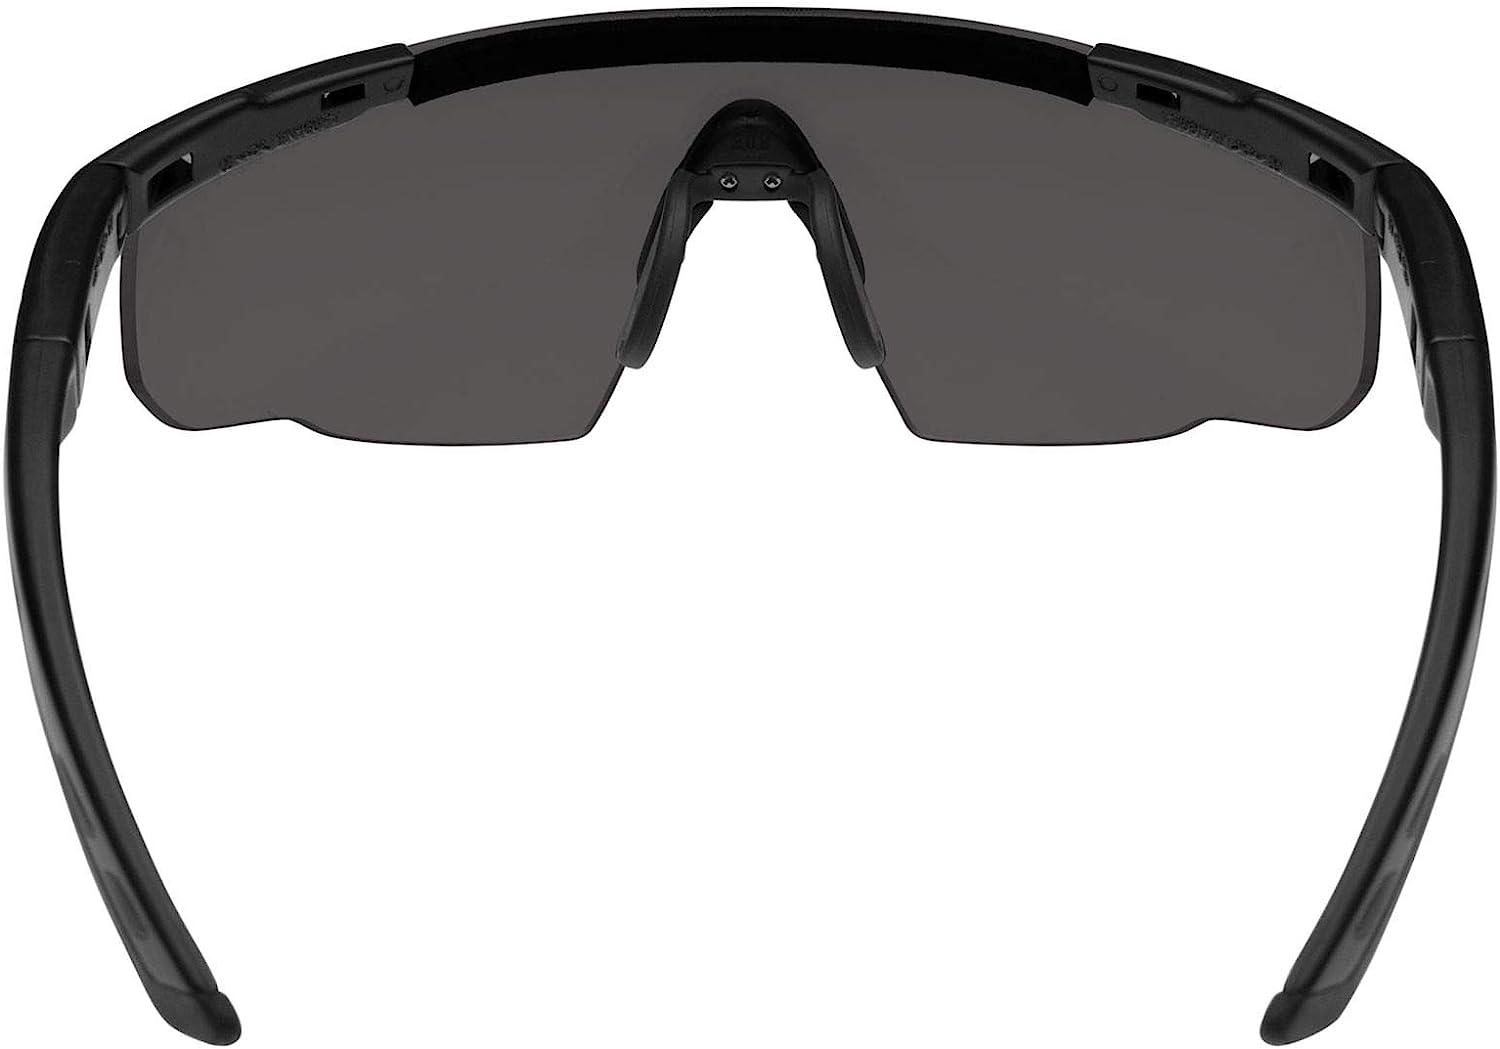 Wiley X Saber Advanced Shooting Glasses, Safety Sunglasses for Men